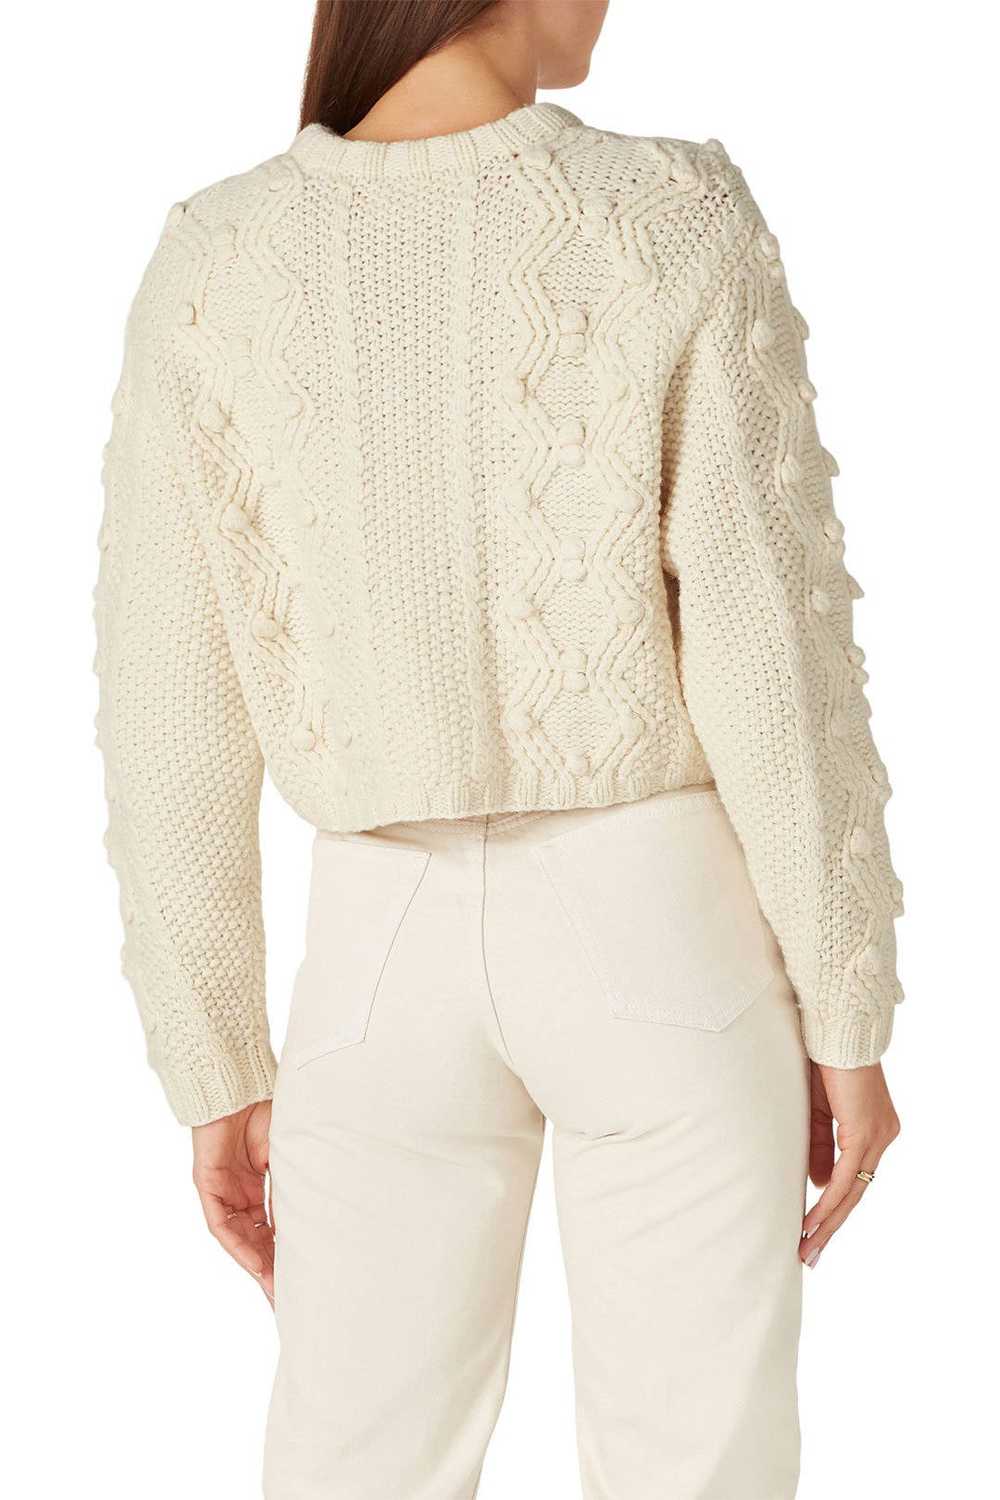 Divine Heritage Cropped Cable-Knit Sweater - image 3